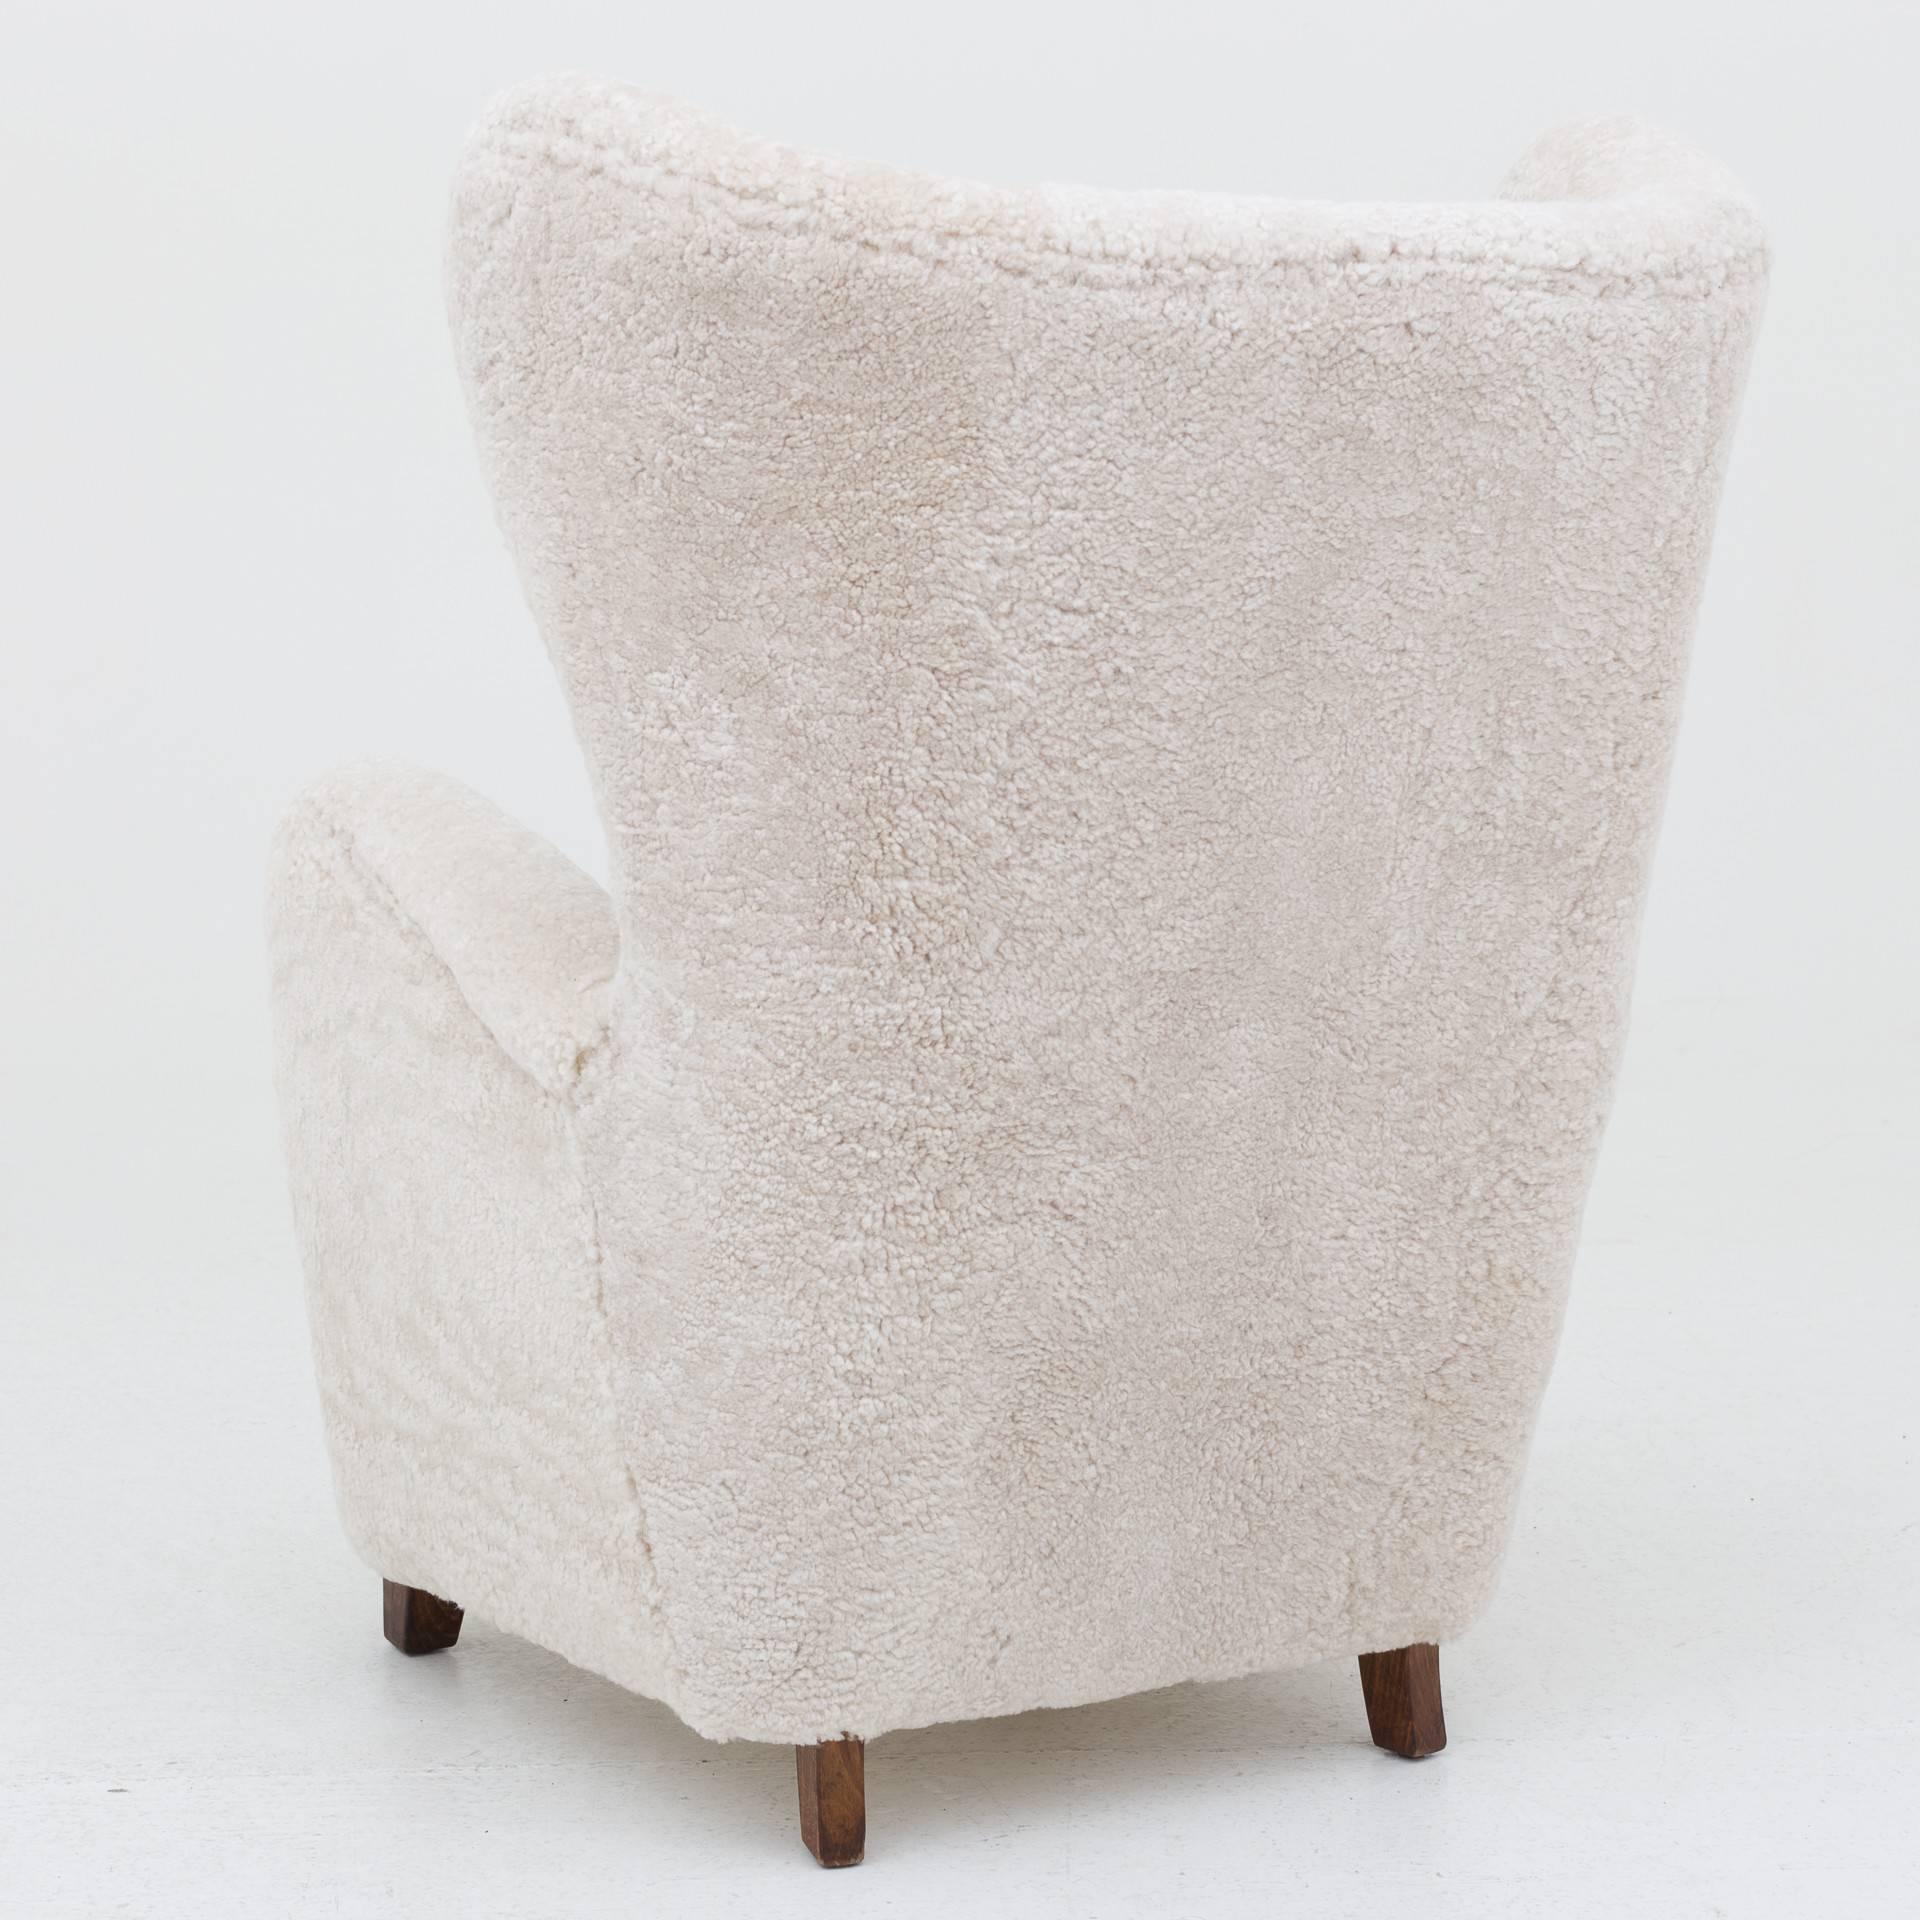 Wingback chair upholstered with lambs wool Moonlight 09. Legs in beech.